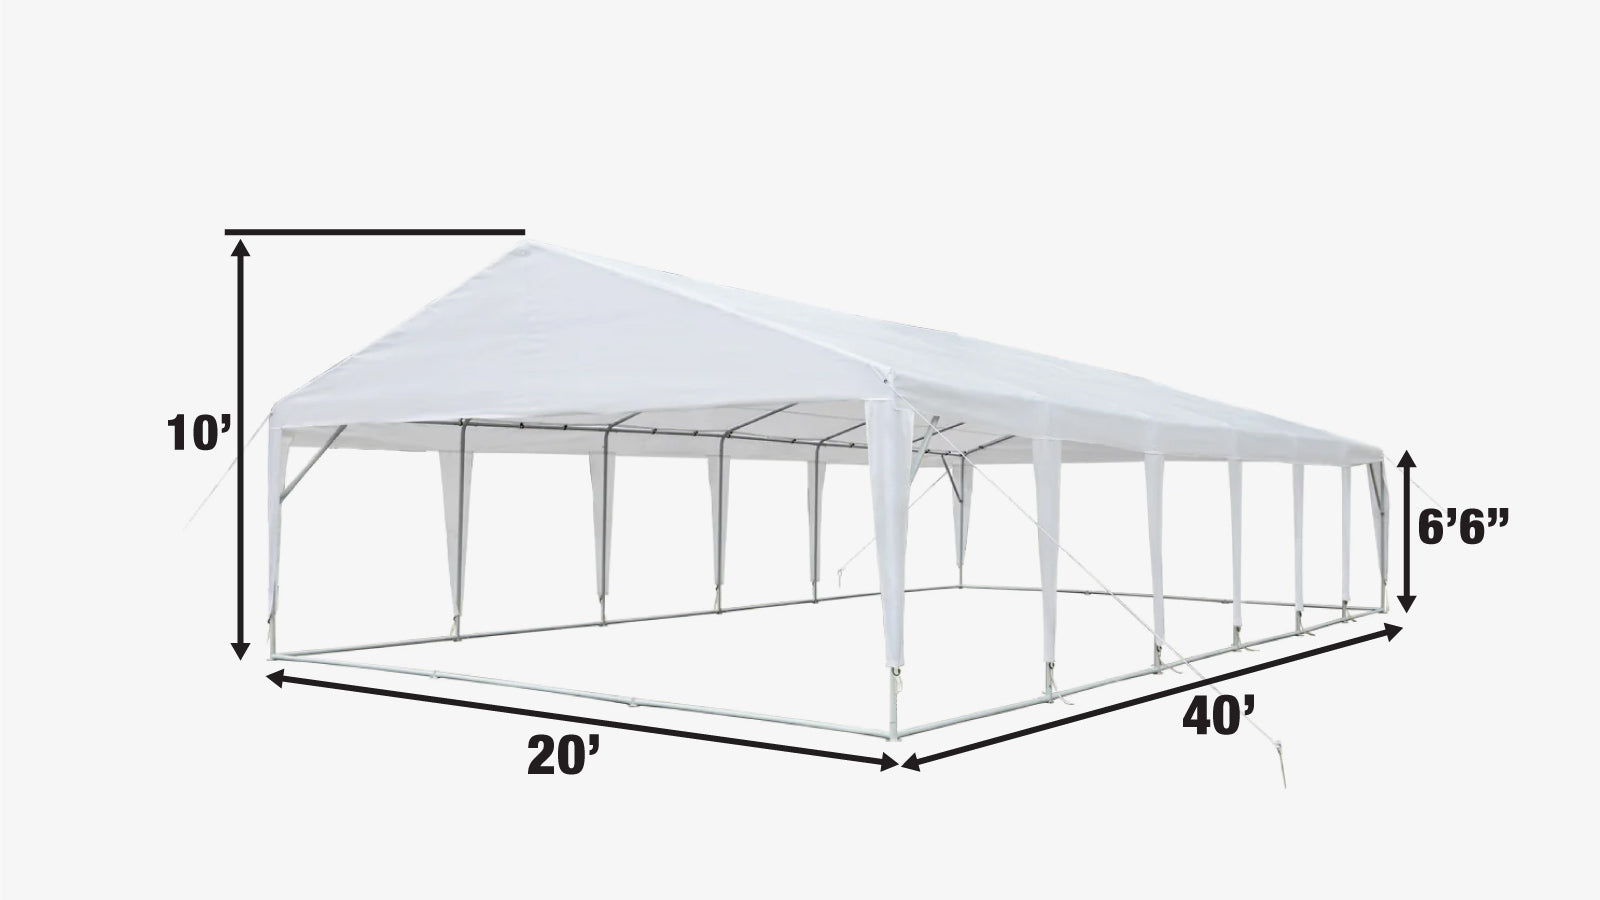 TMG Industrial 20' x 40' Heavy Duty Outdoor Party Tent, 11 oz PE Cover, 6’6” Overhead, 10’ Peak Ceiling, TMG-PT2040A-specifications-image